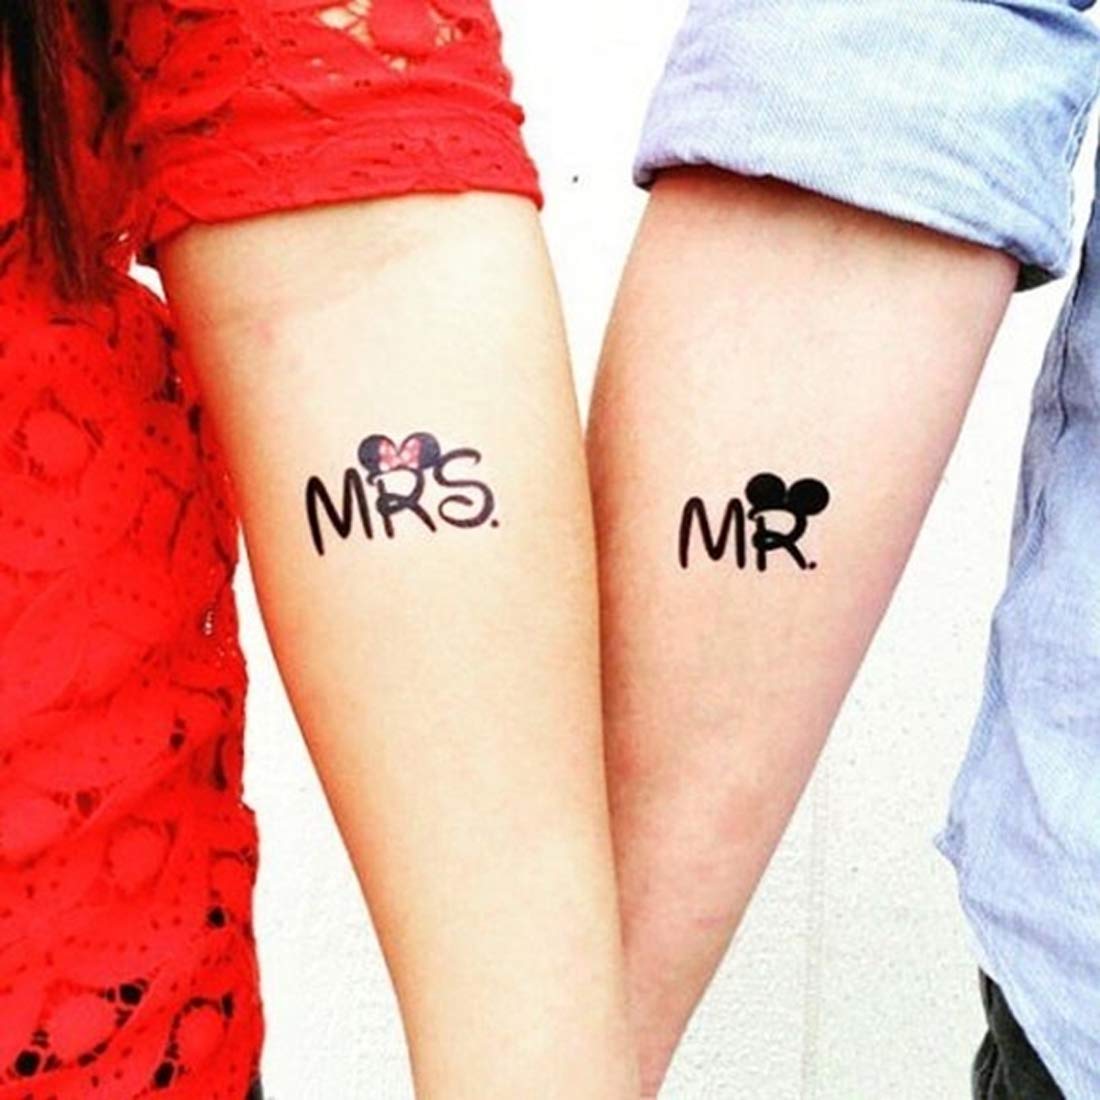 Husband leaves wife permanent ink